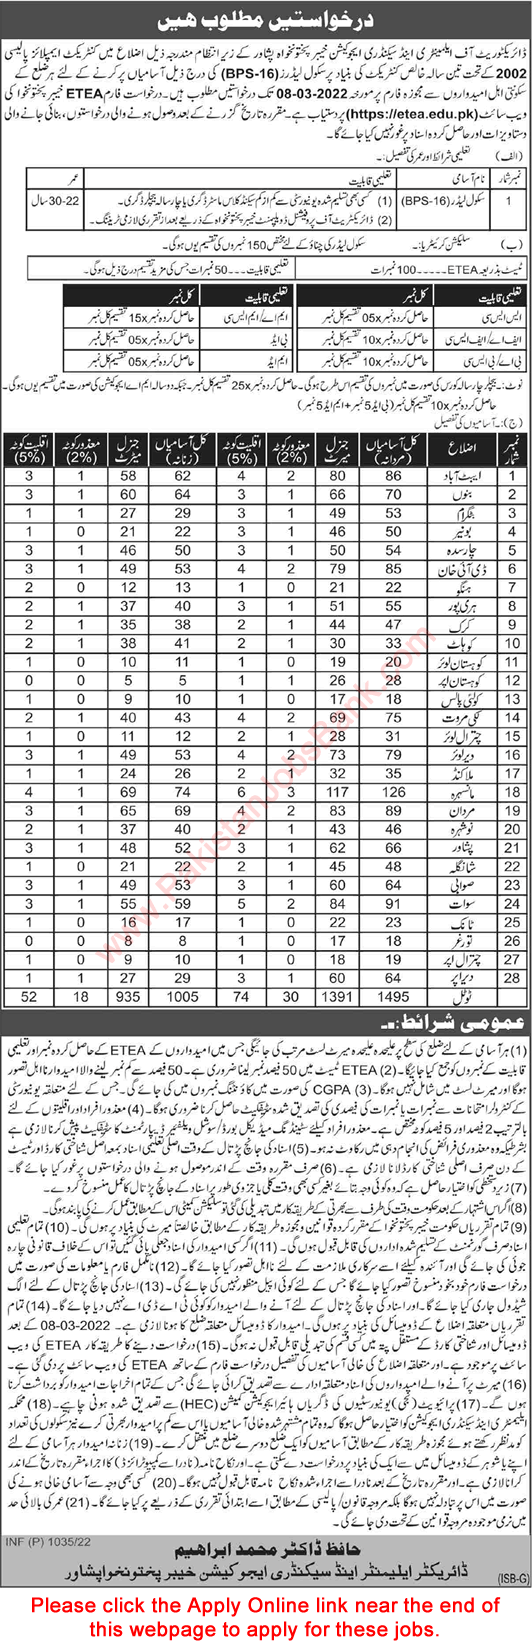 School Leader Jobs in Elementary and Secondary Education Department KPK 2022 February ETEA Apply Online Latest